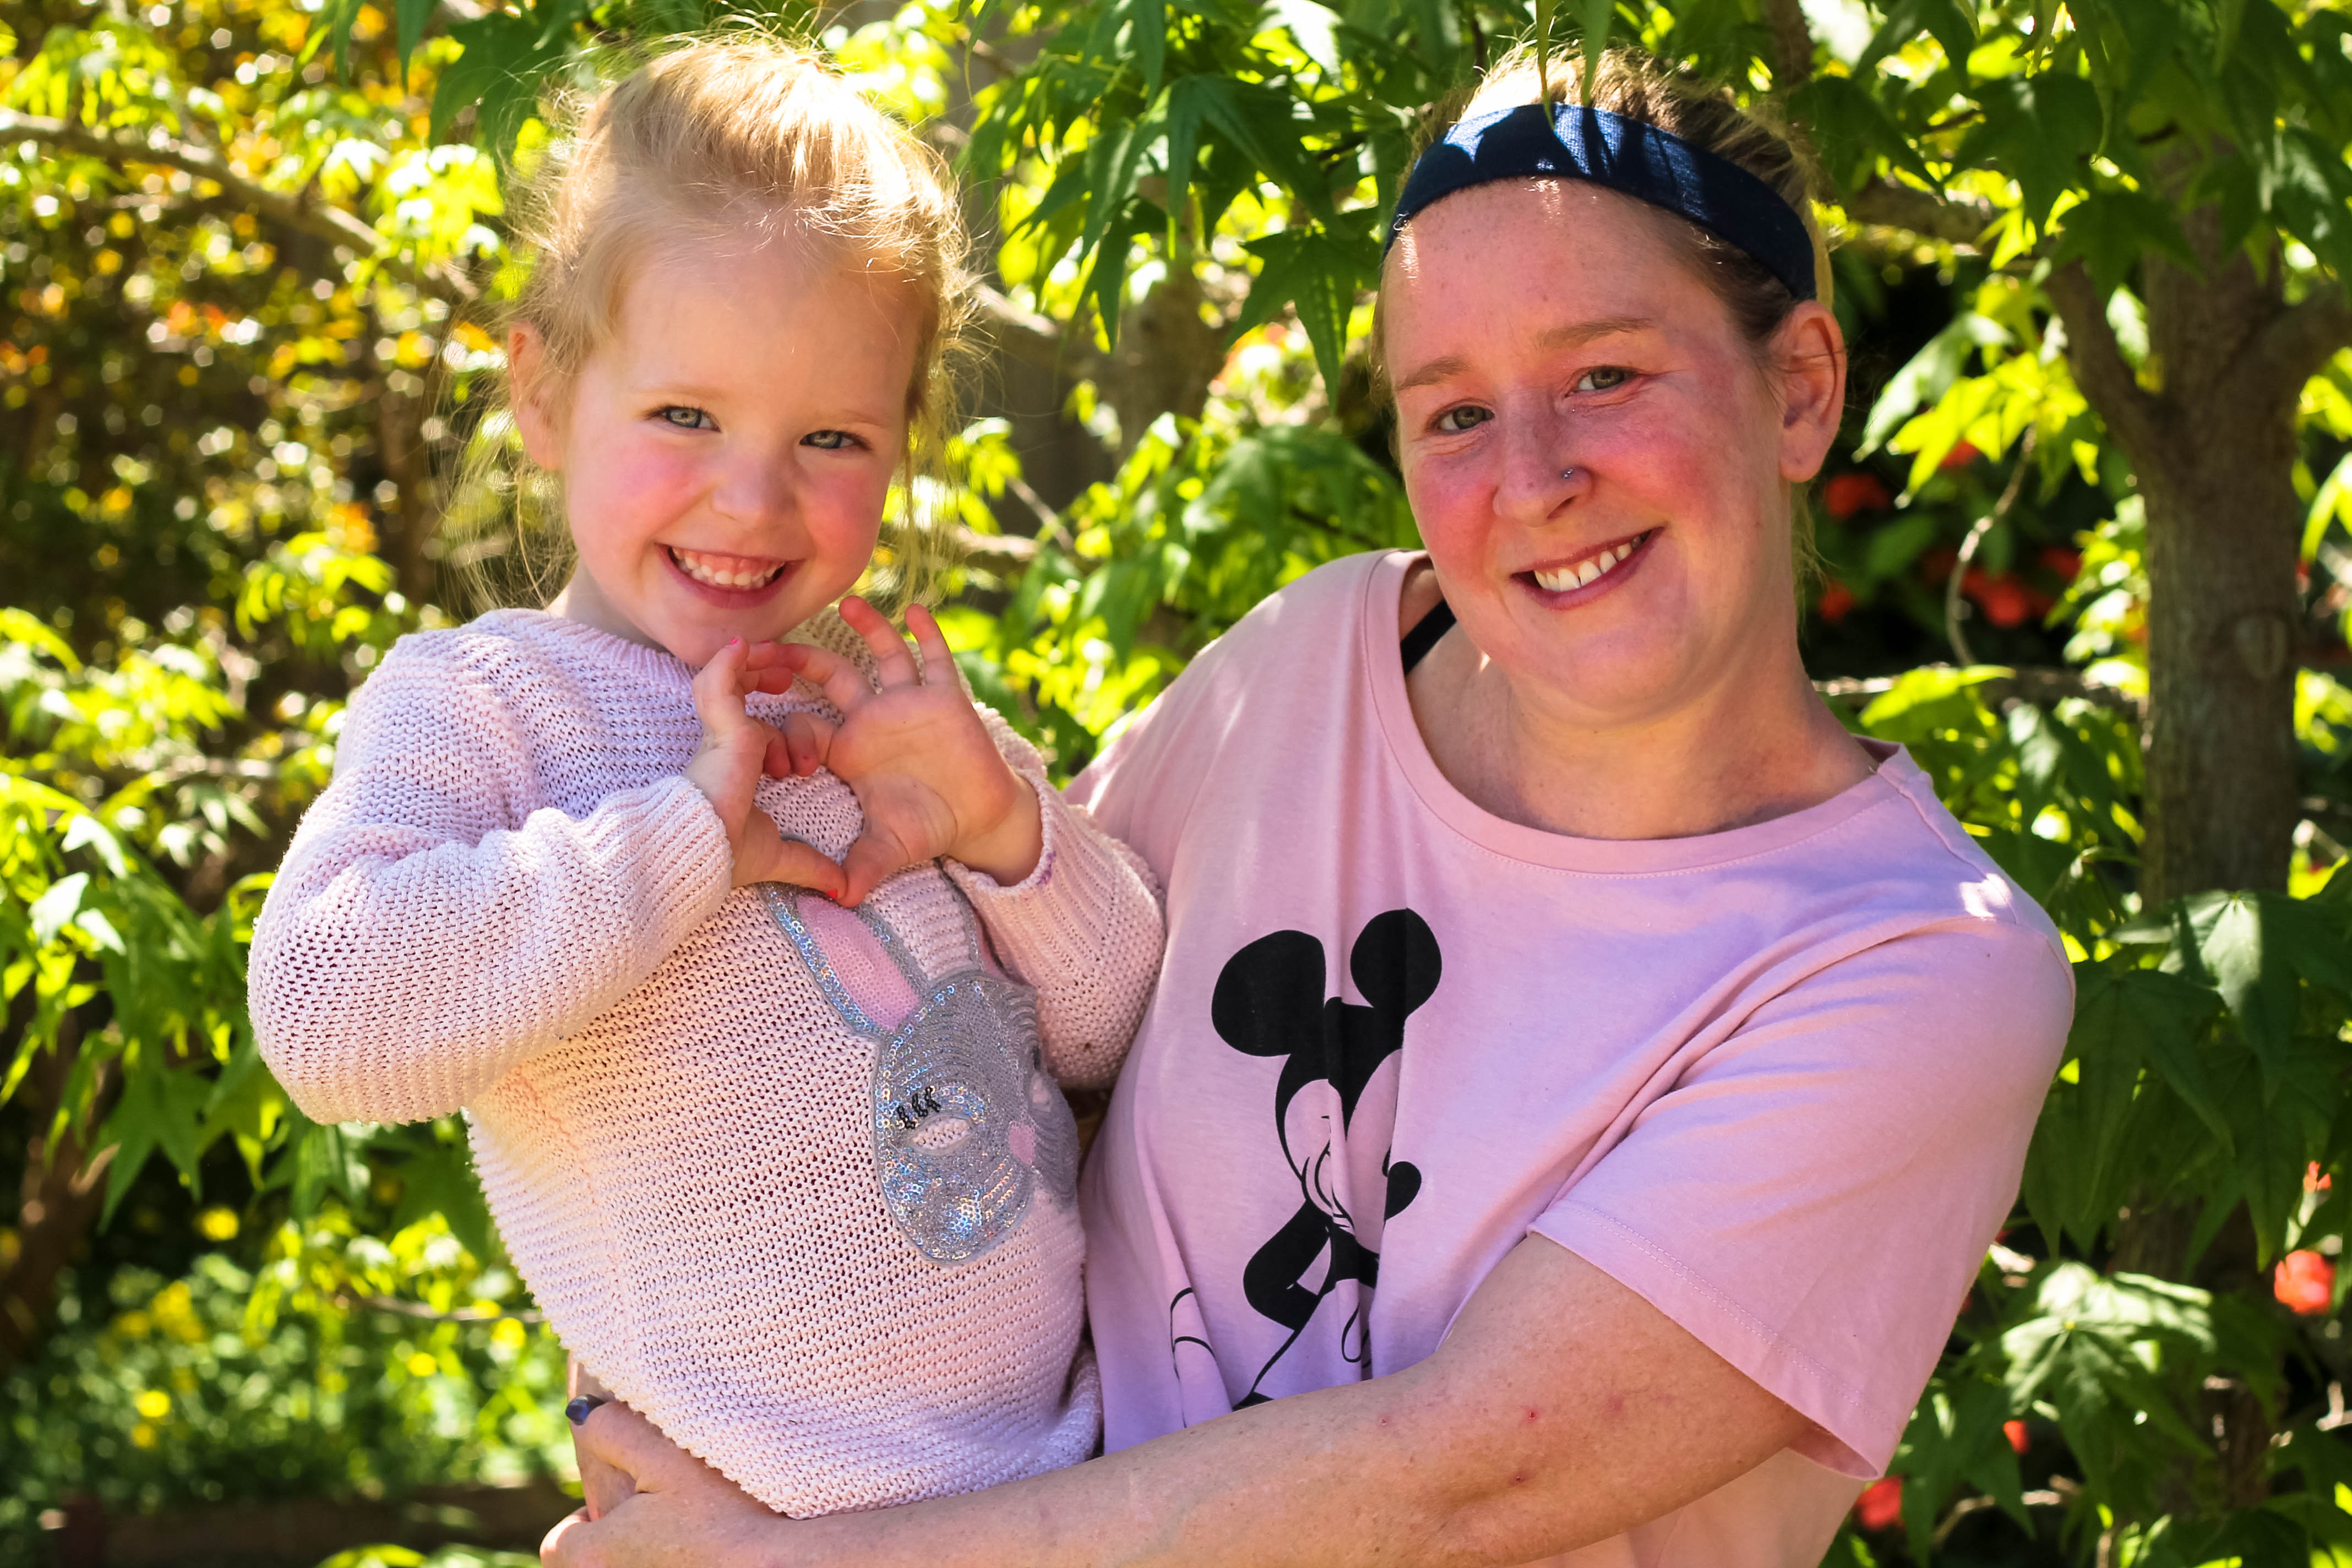 Transplant recipient Leah and her four-year-old daughter Isla